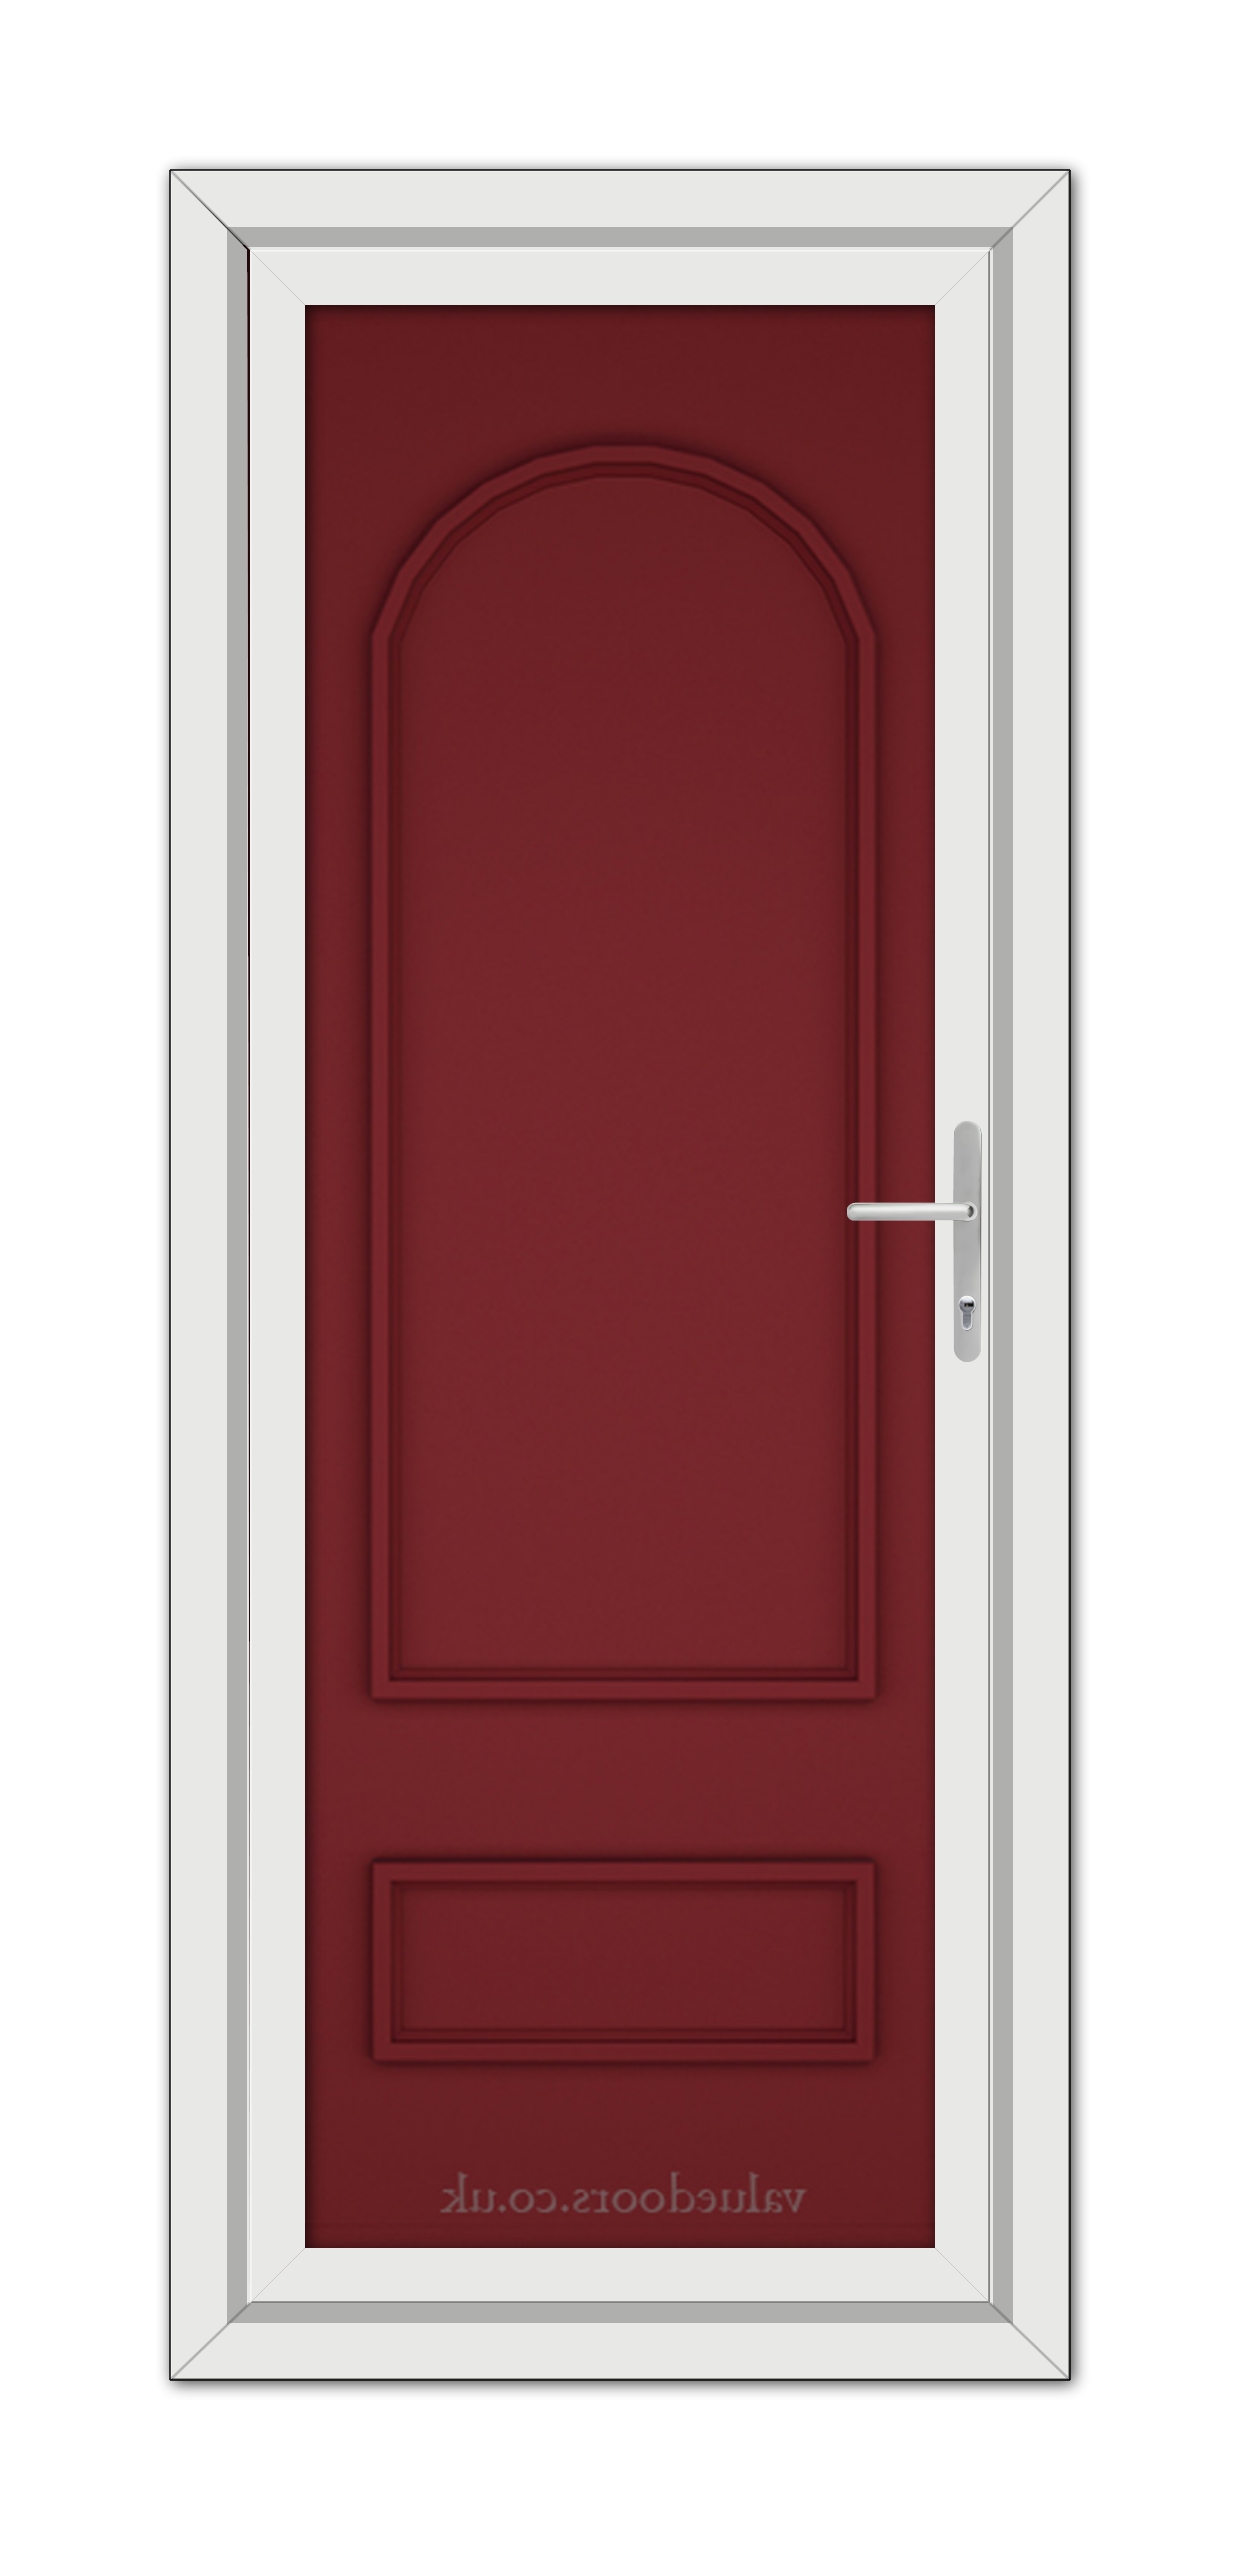 A Red Canterbury Solid uPVC Door with white trim.